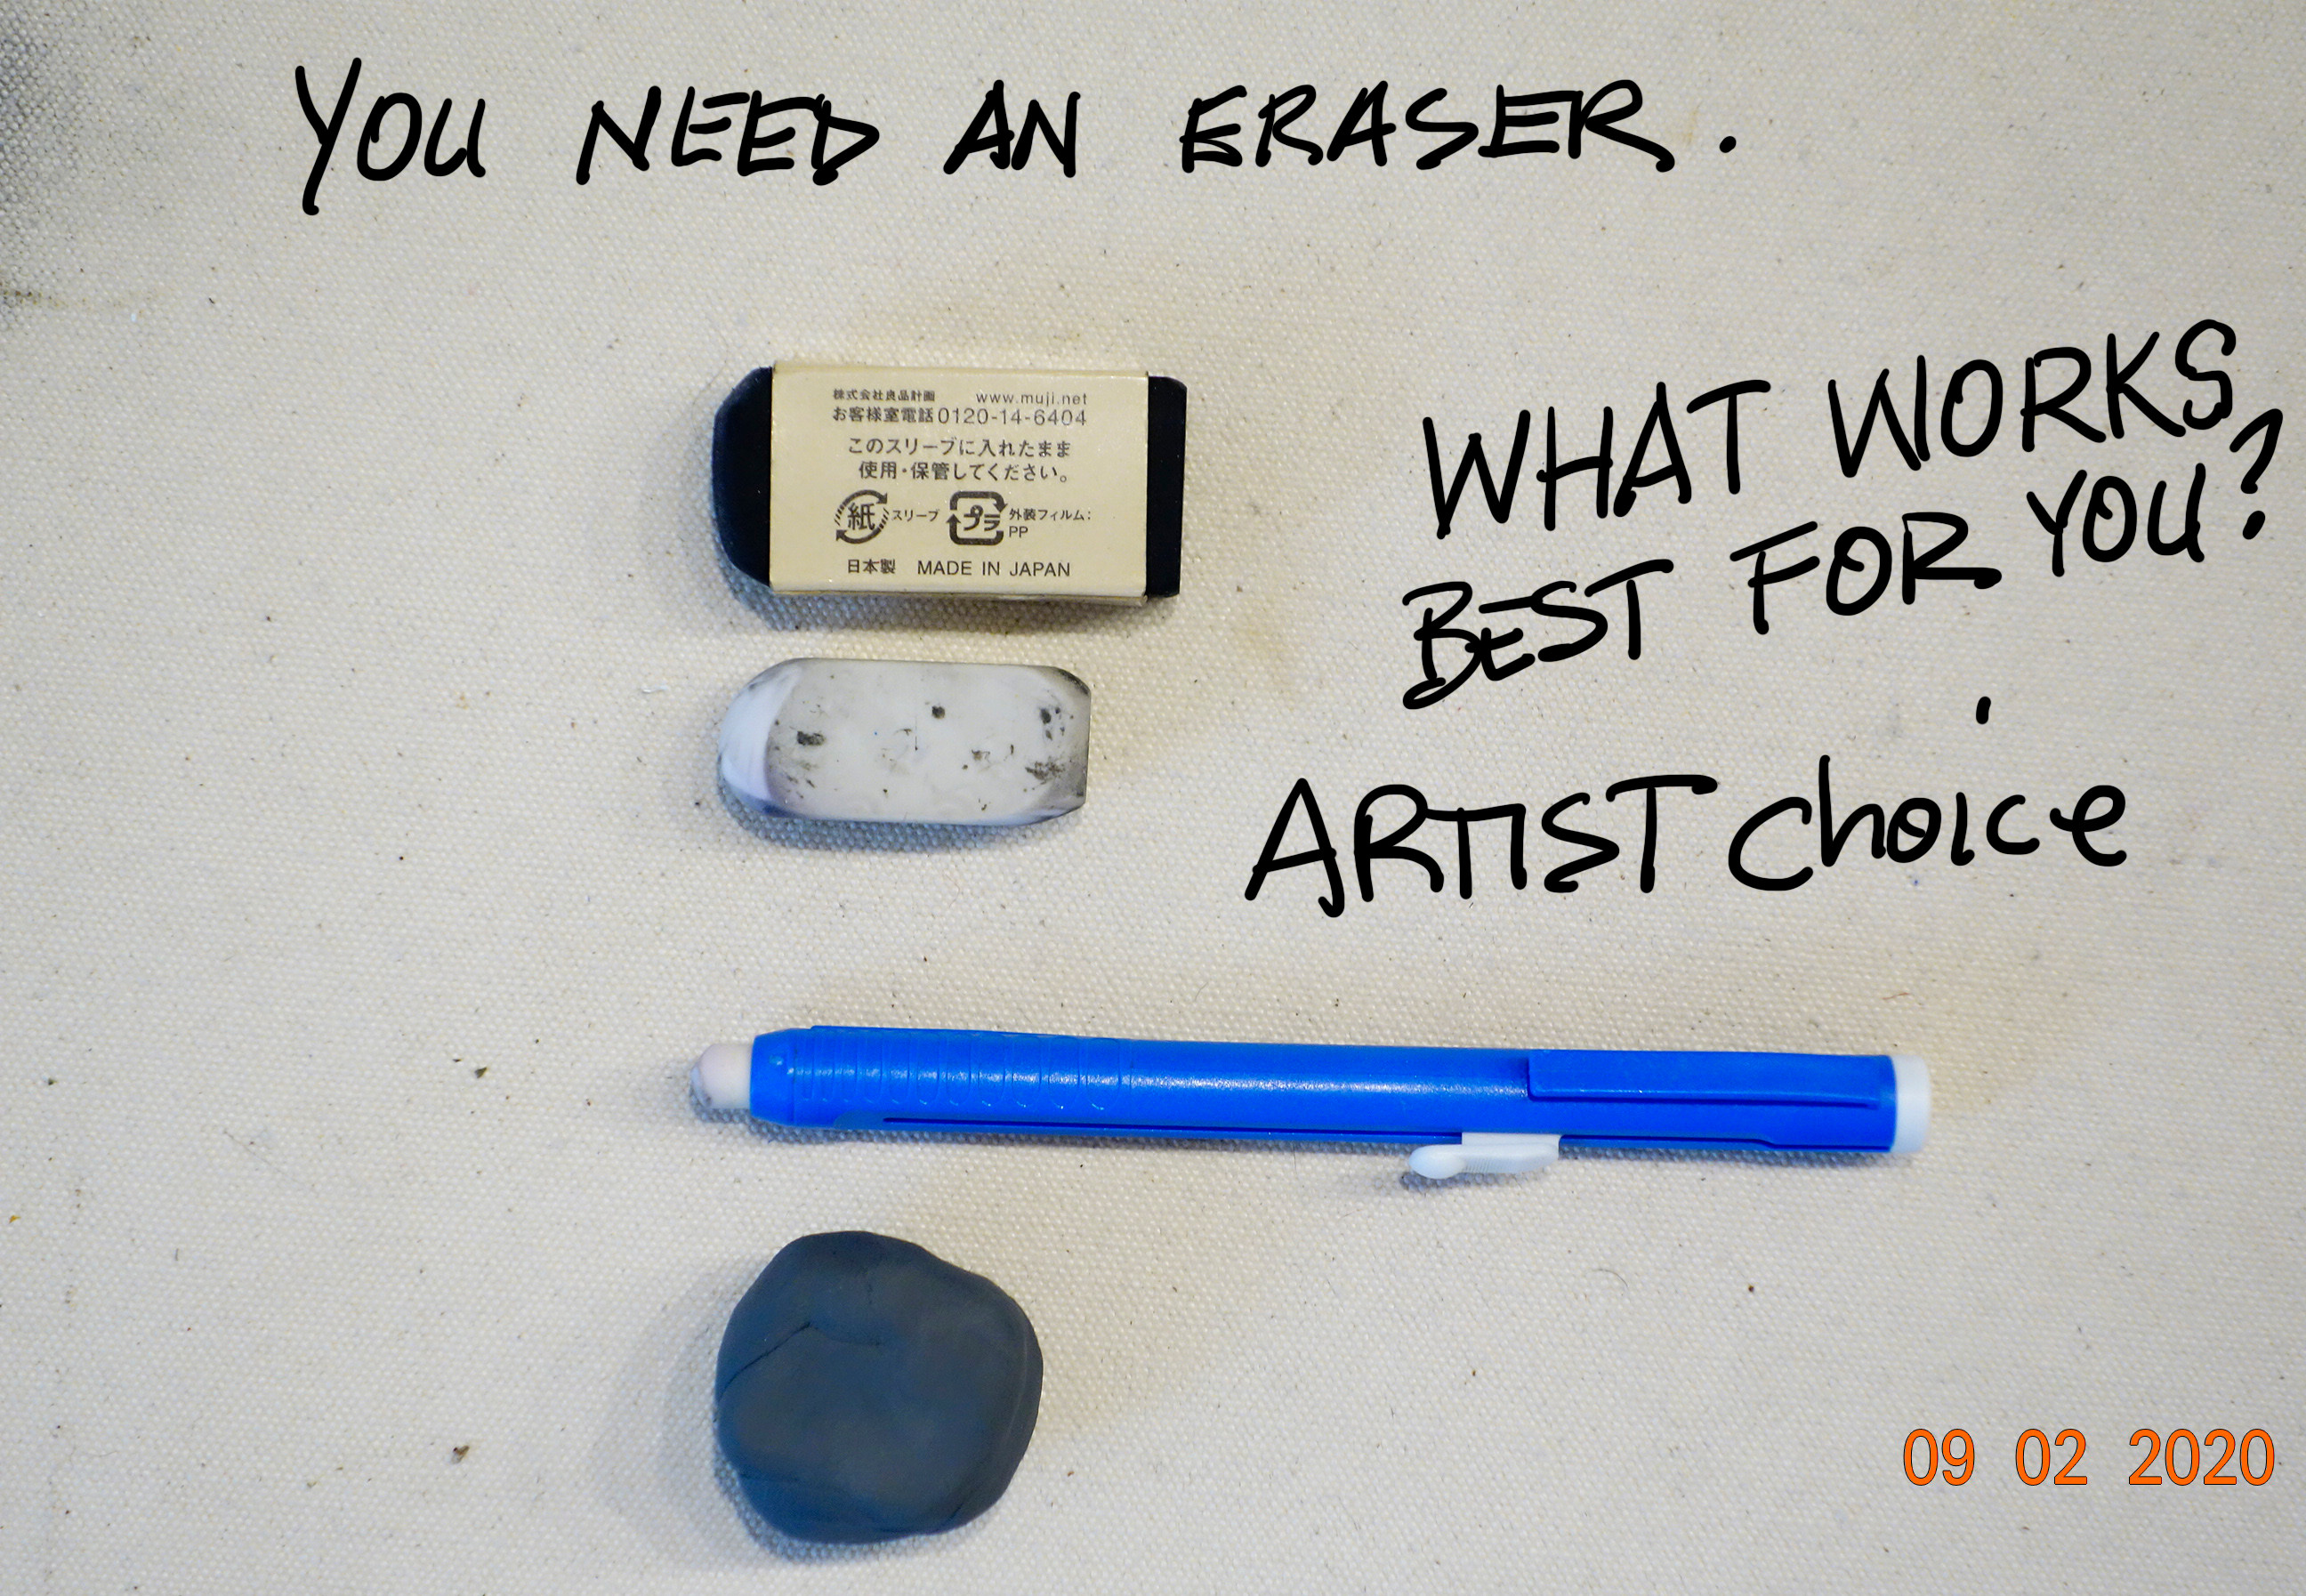 Get an eraser that works for you. I like the rubber kind and the eraser tubes that go in holders for detailed and tights spots. You are the artist you decide.